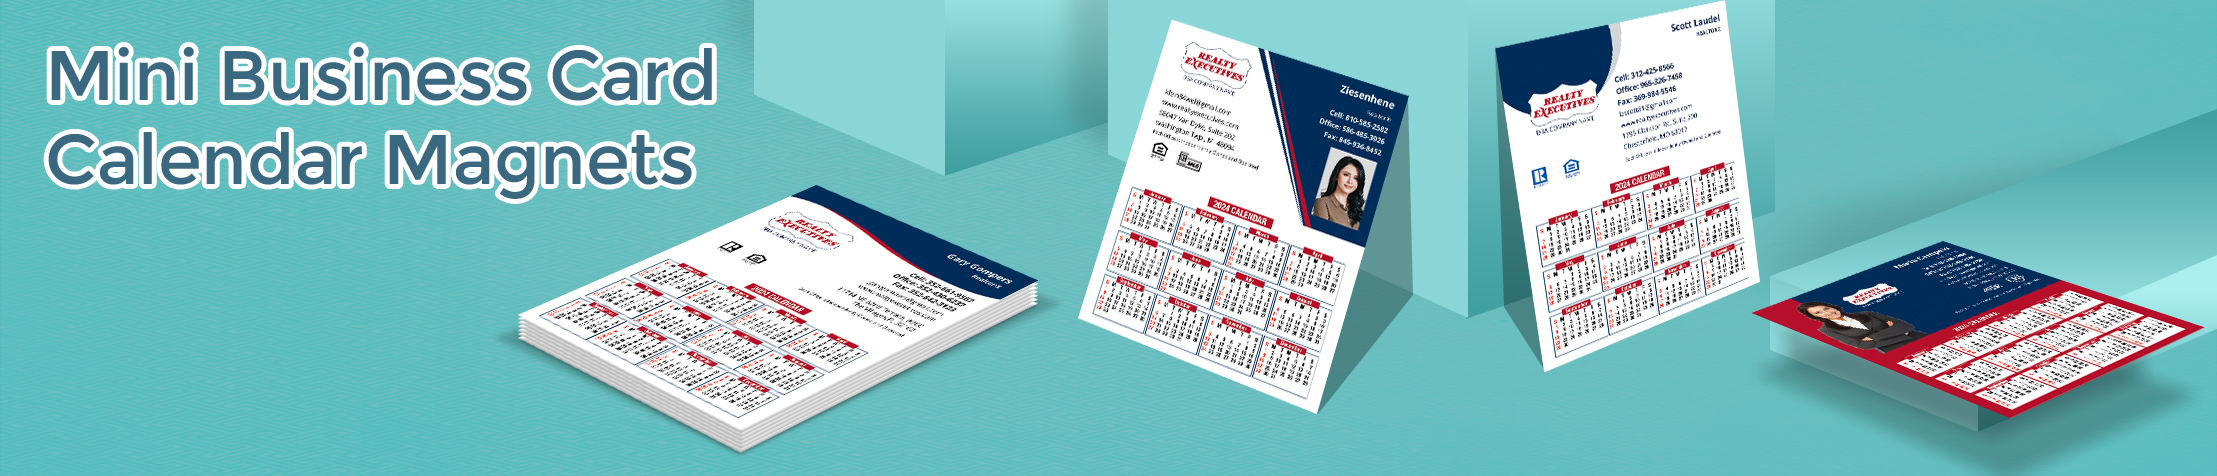 Realty Executives Real Estate Mini Business Card Calendar Magnets - Realty Executives  2019 calendars with photo and contact info, 3.5” by 4.25” | BestPrintBuy.com